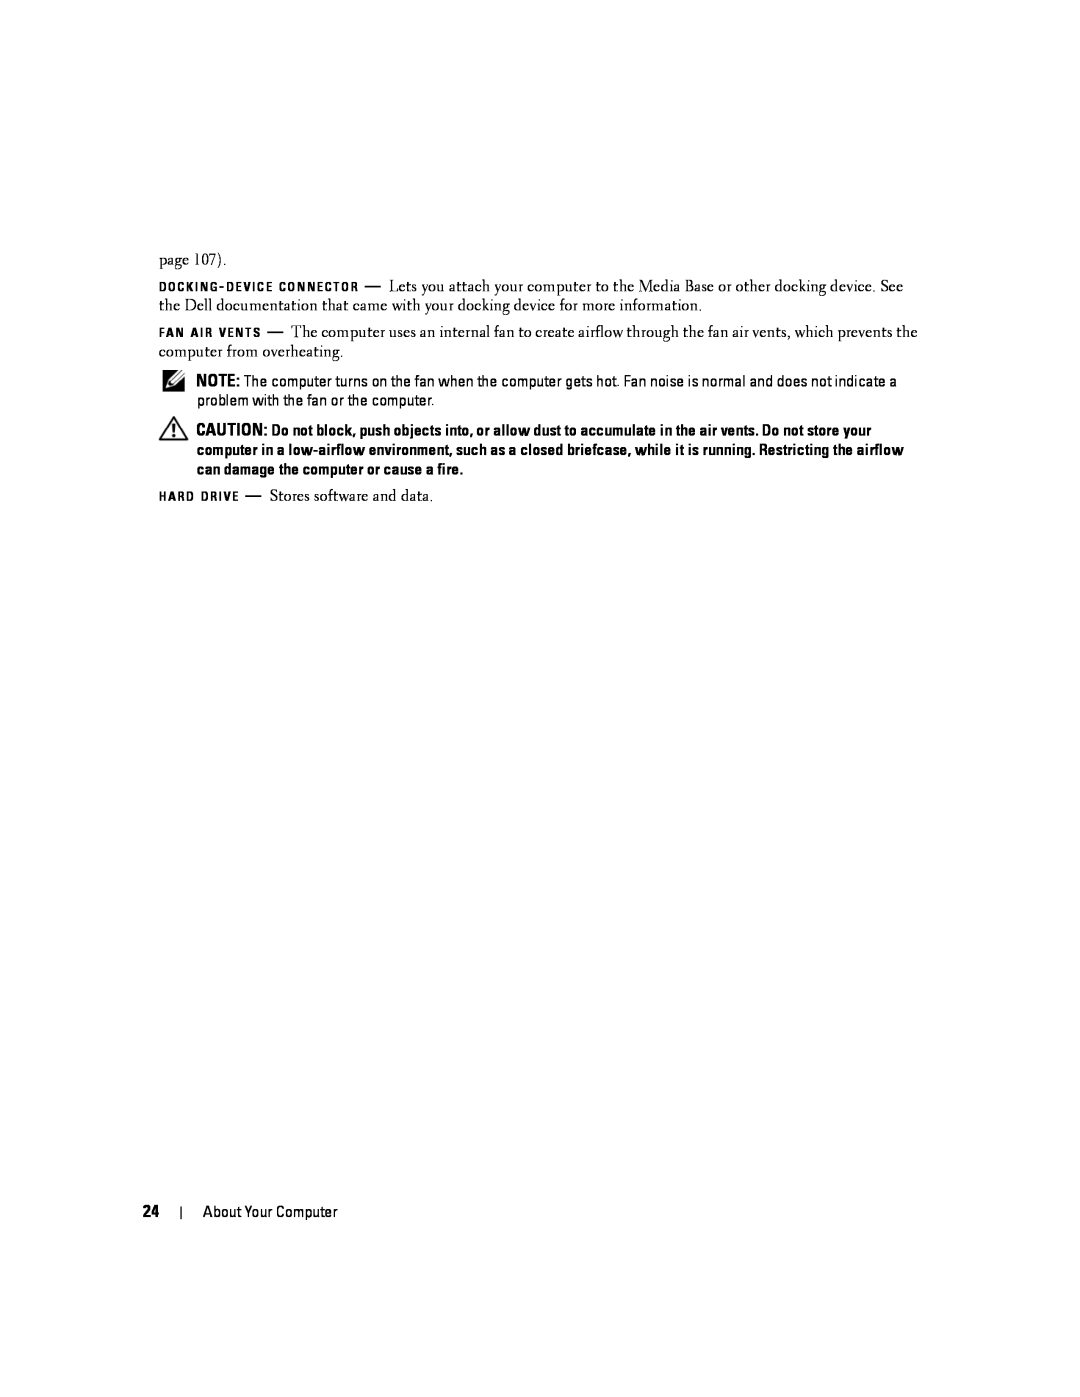 Dell PP04X, D830 manual page 